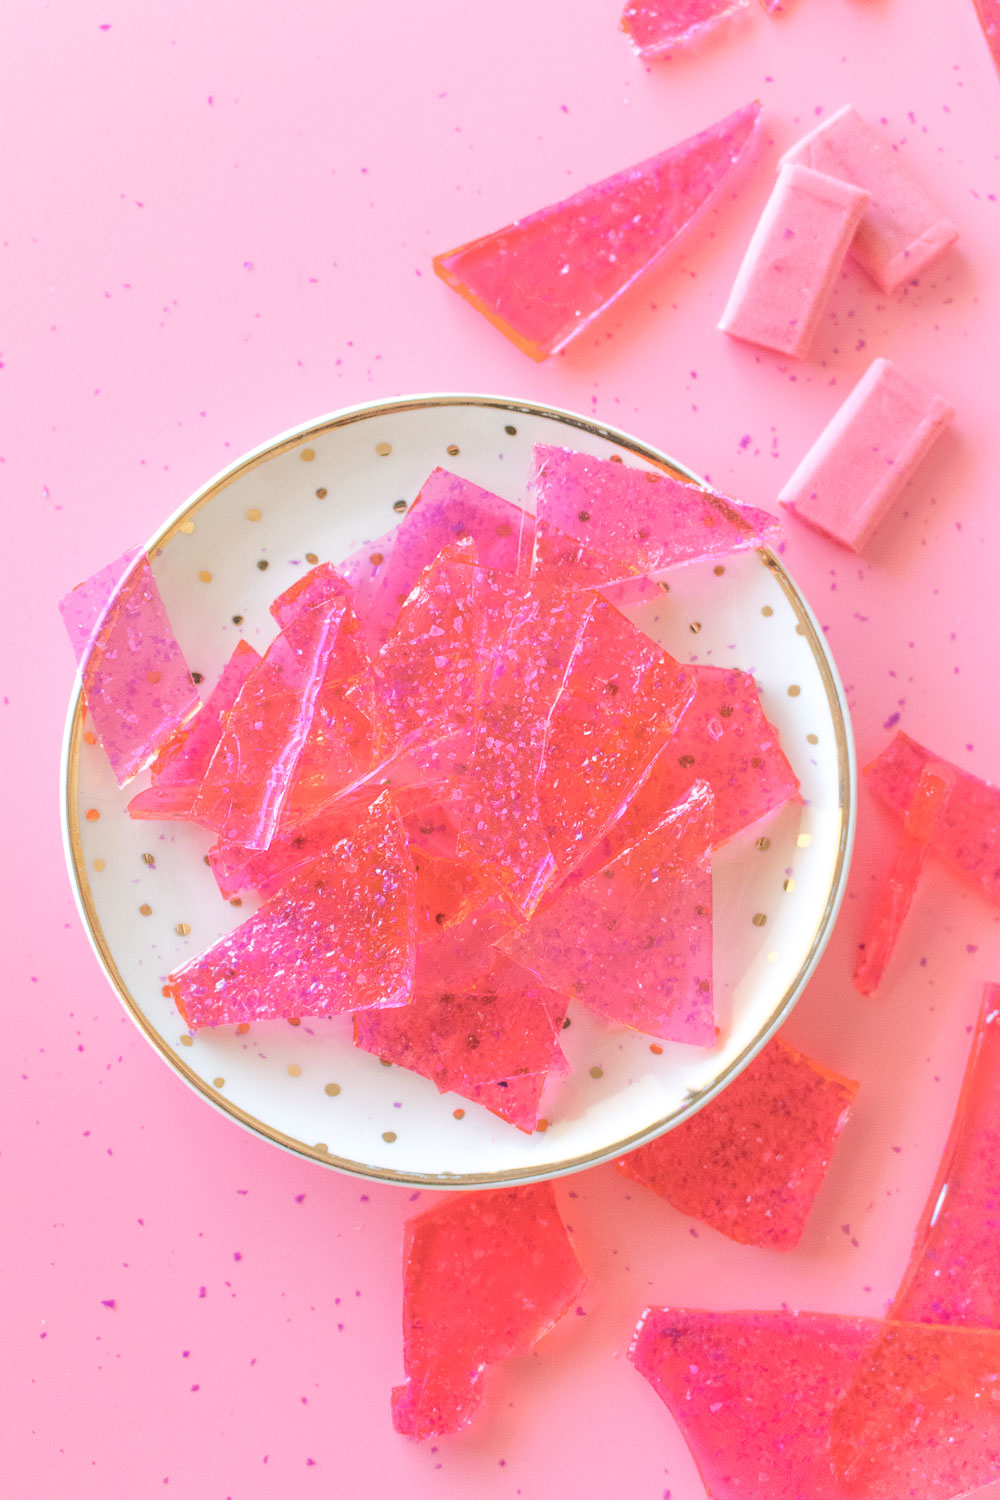 https://www.clubcrafted.com/wp-content/uploads/2017/05/bubble-gum-rock-candy-shards-recipe-4.jpg